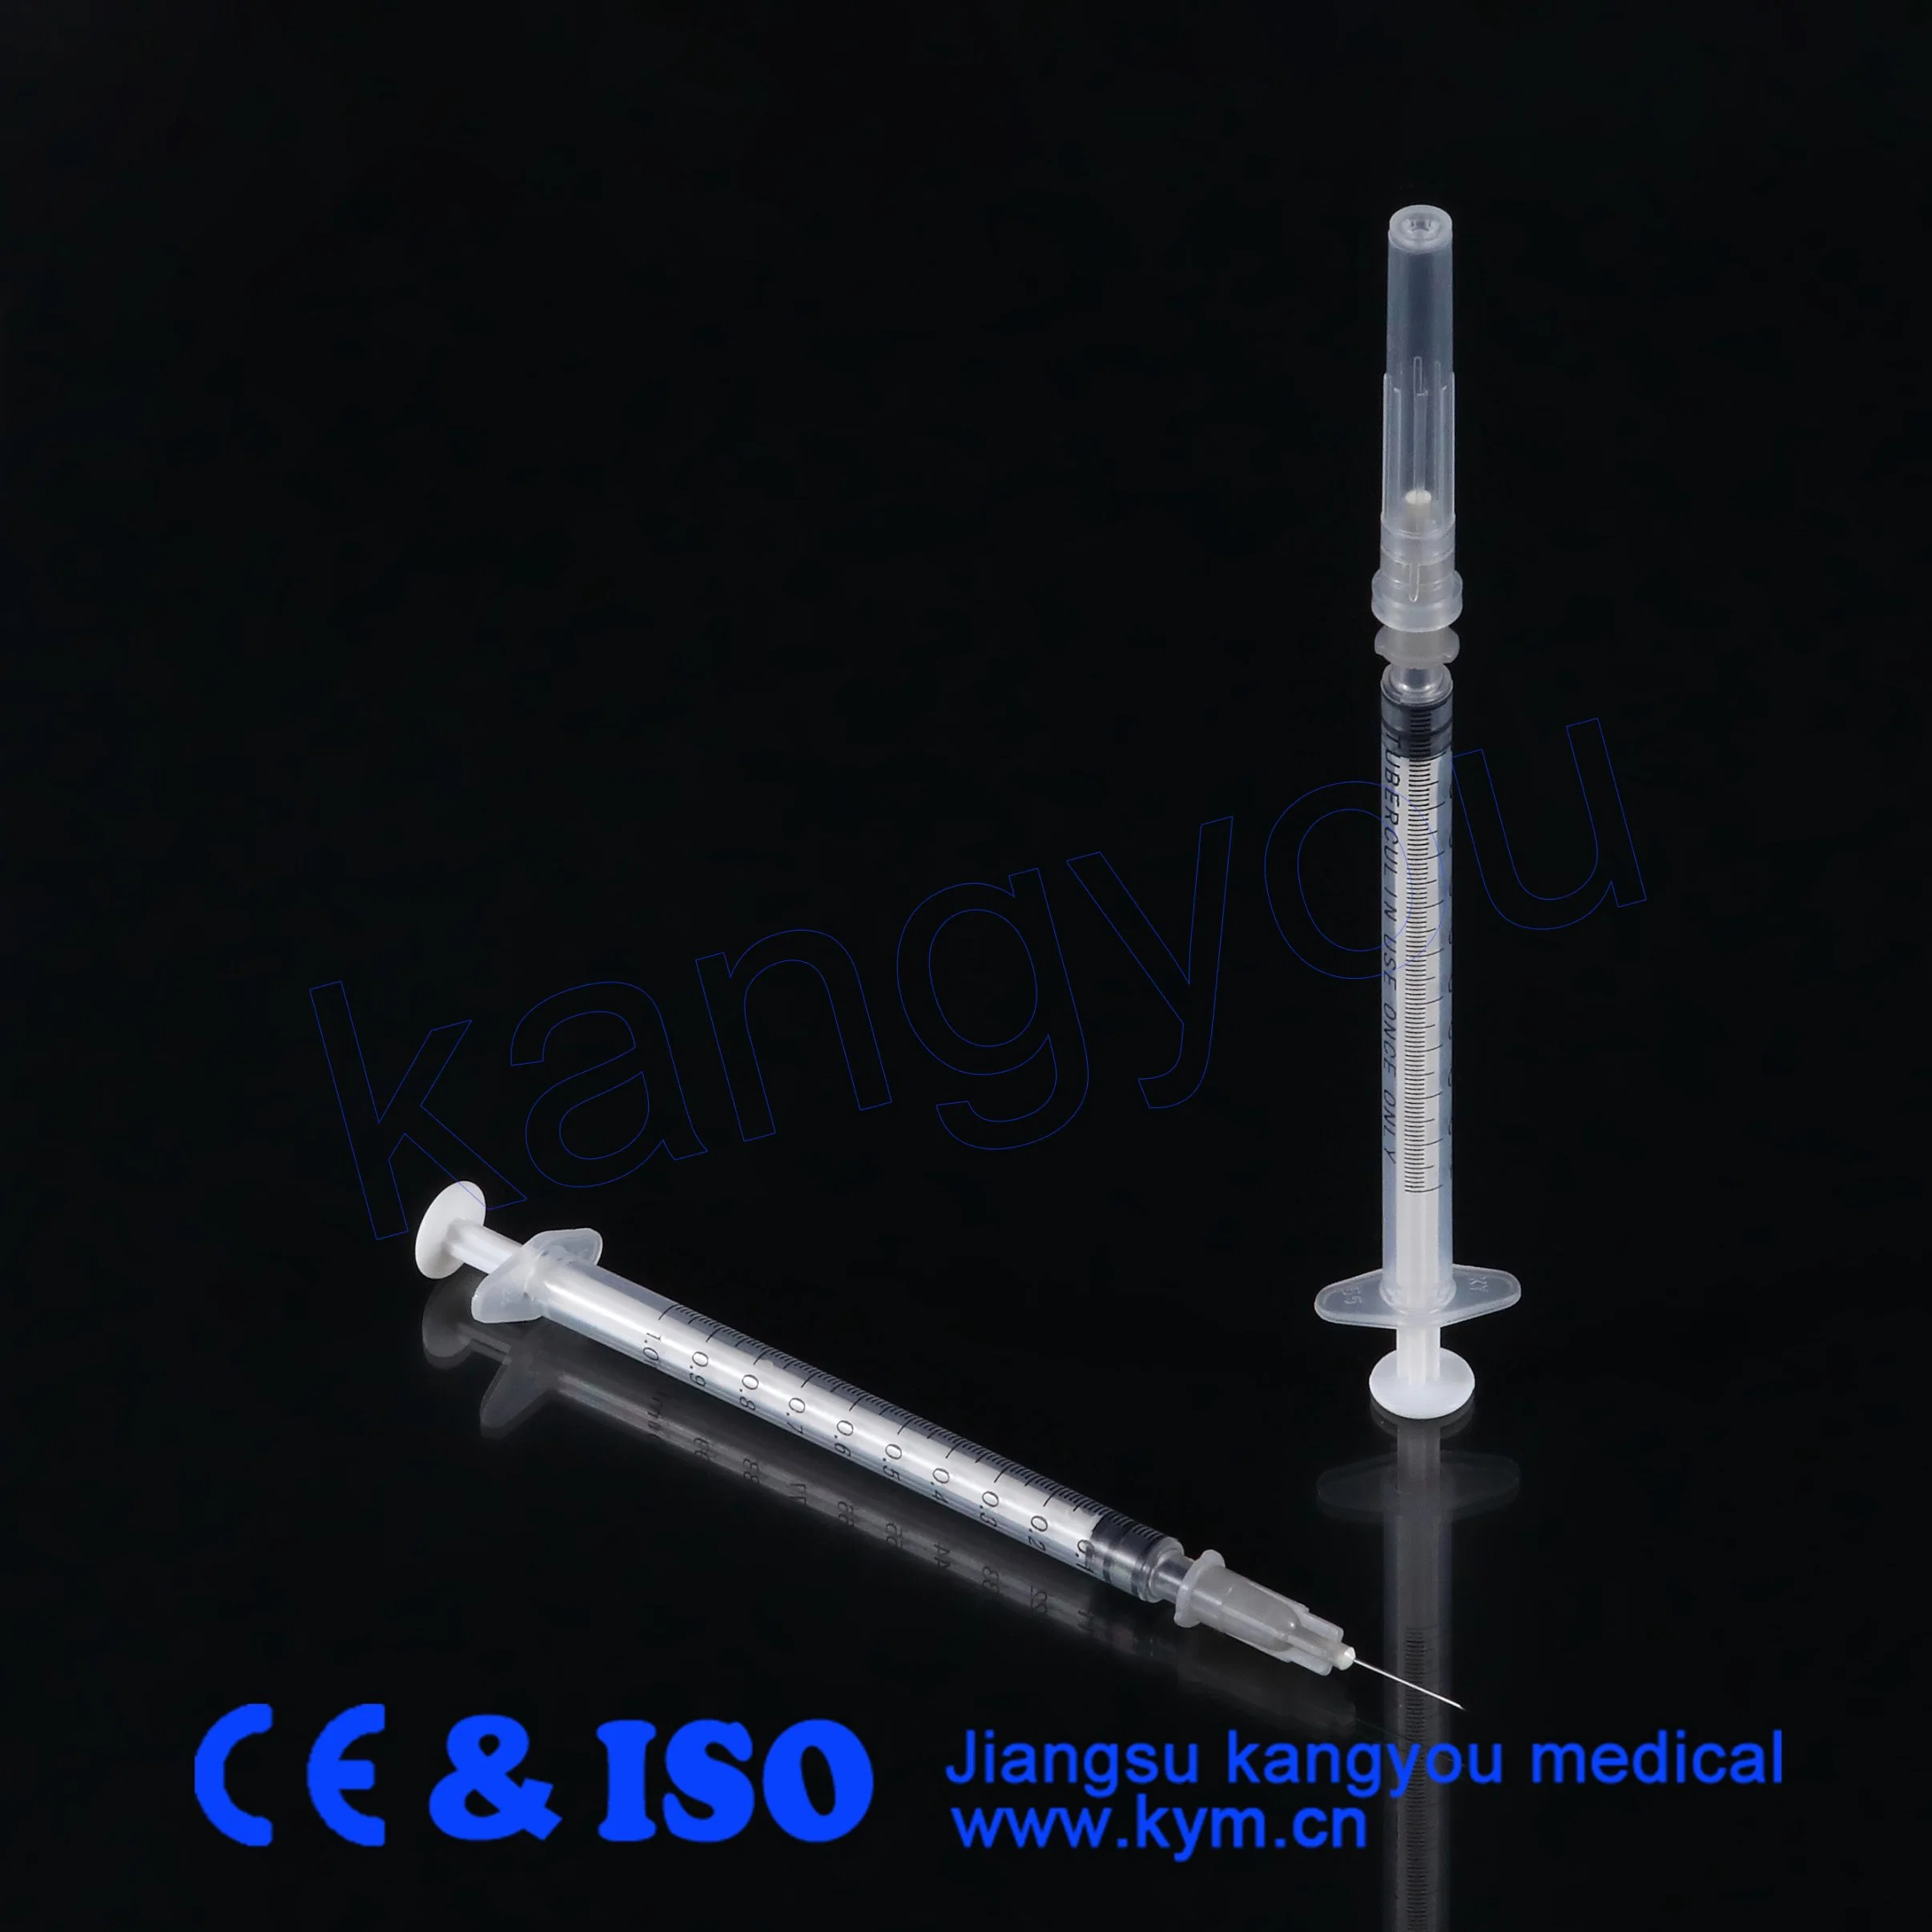 China Wholesale Medical Instrument Sterile Hypodermic 3-Part Syringes with Needles Luer Slip and Luer Lock